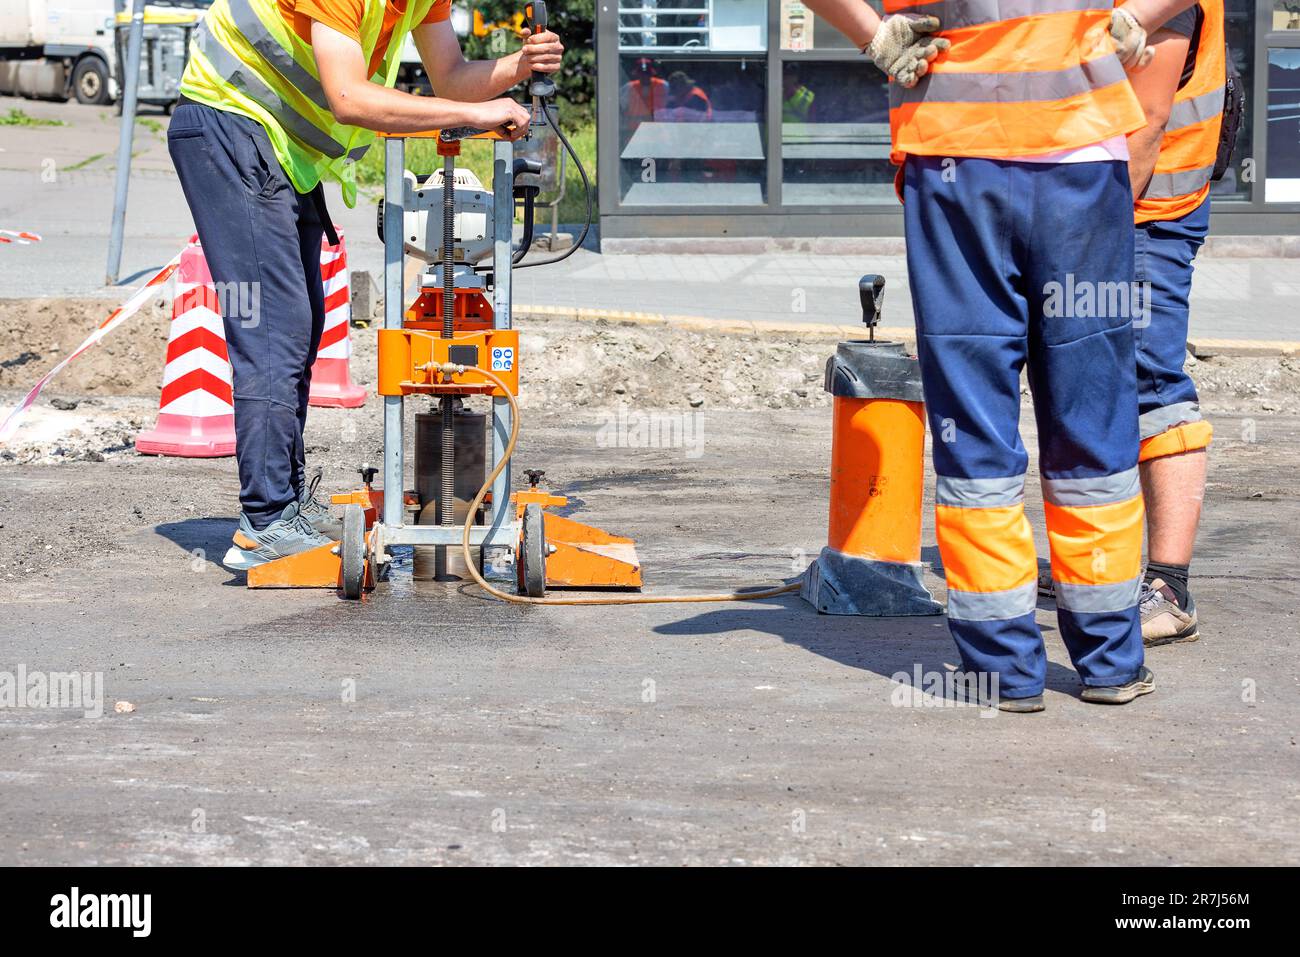 Road workers in reflective capes drill asphalt with a core drilling machine to take and measure cores during road repairs on a sunny day. Copy space. Stock Photo